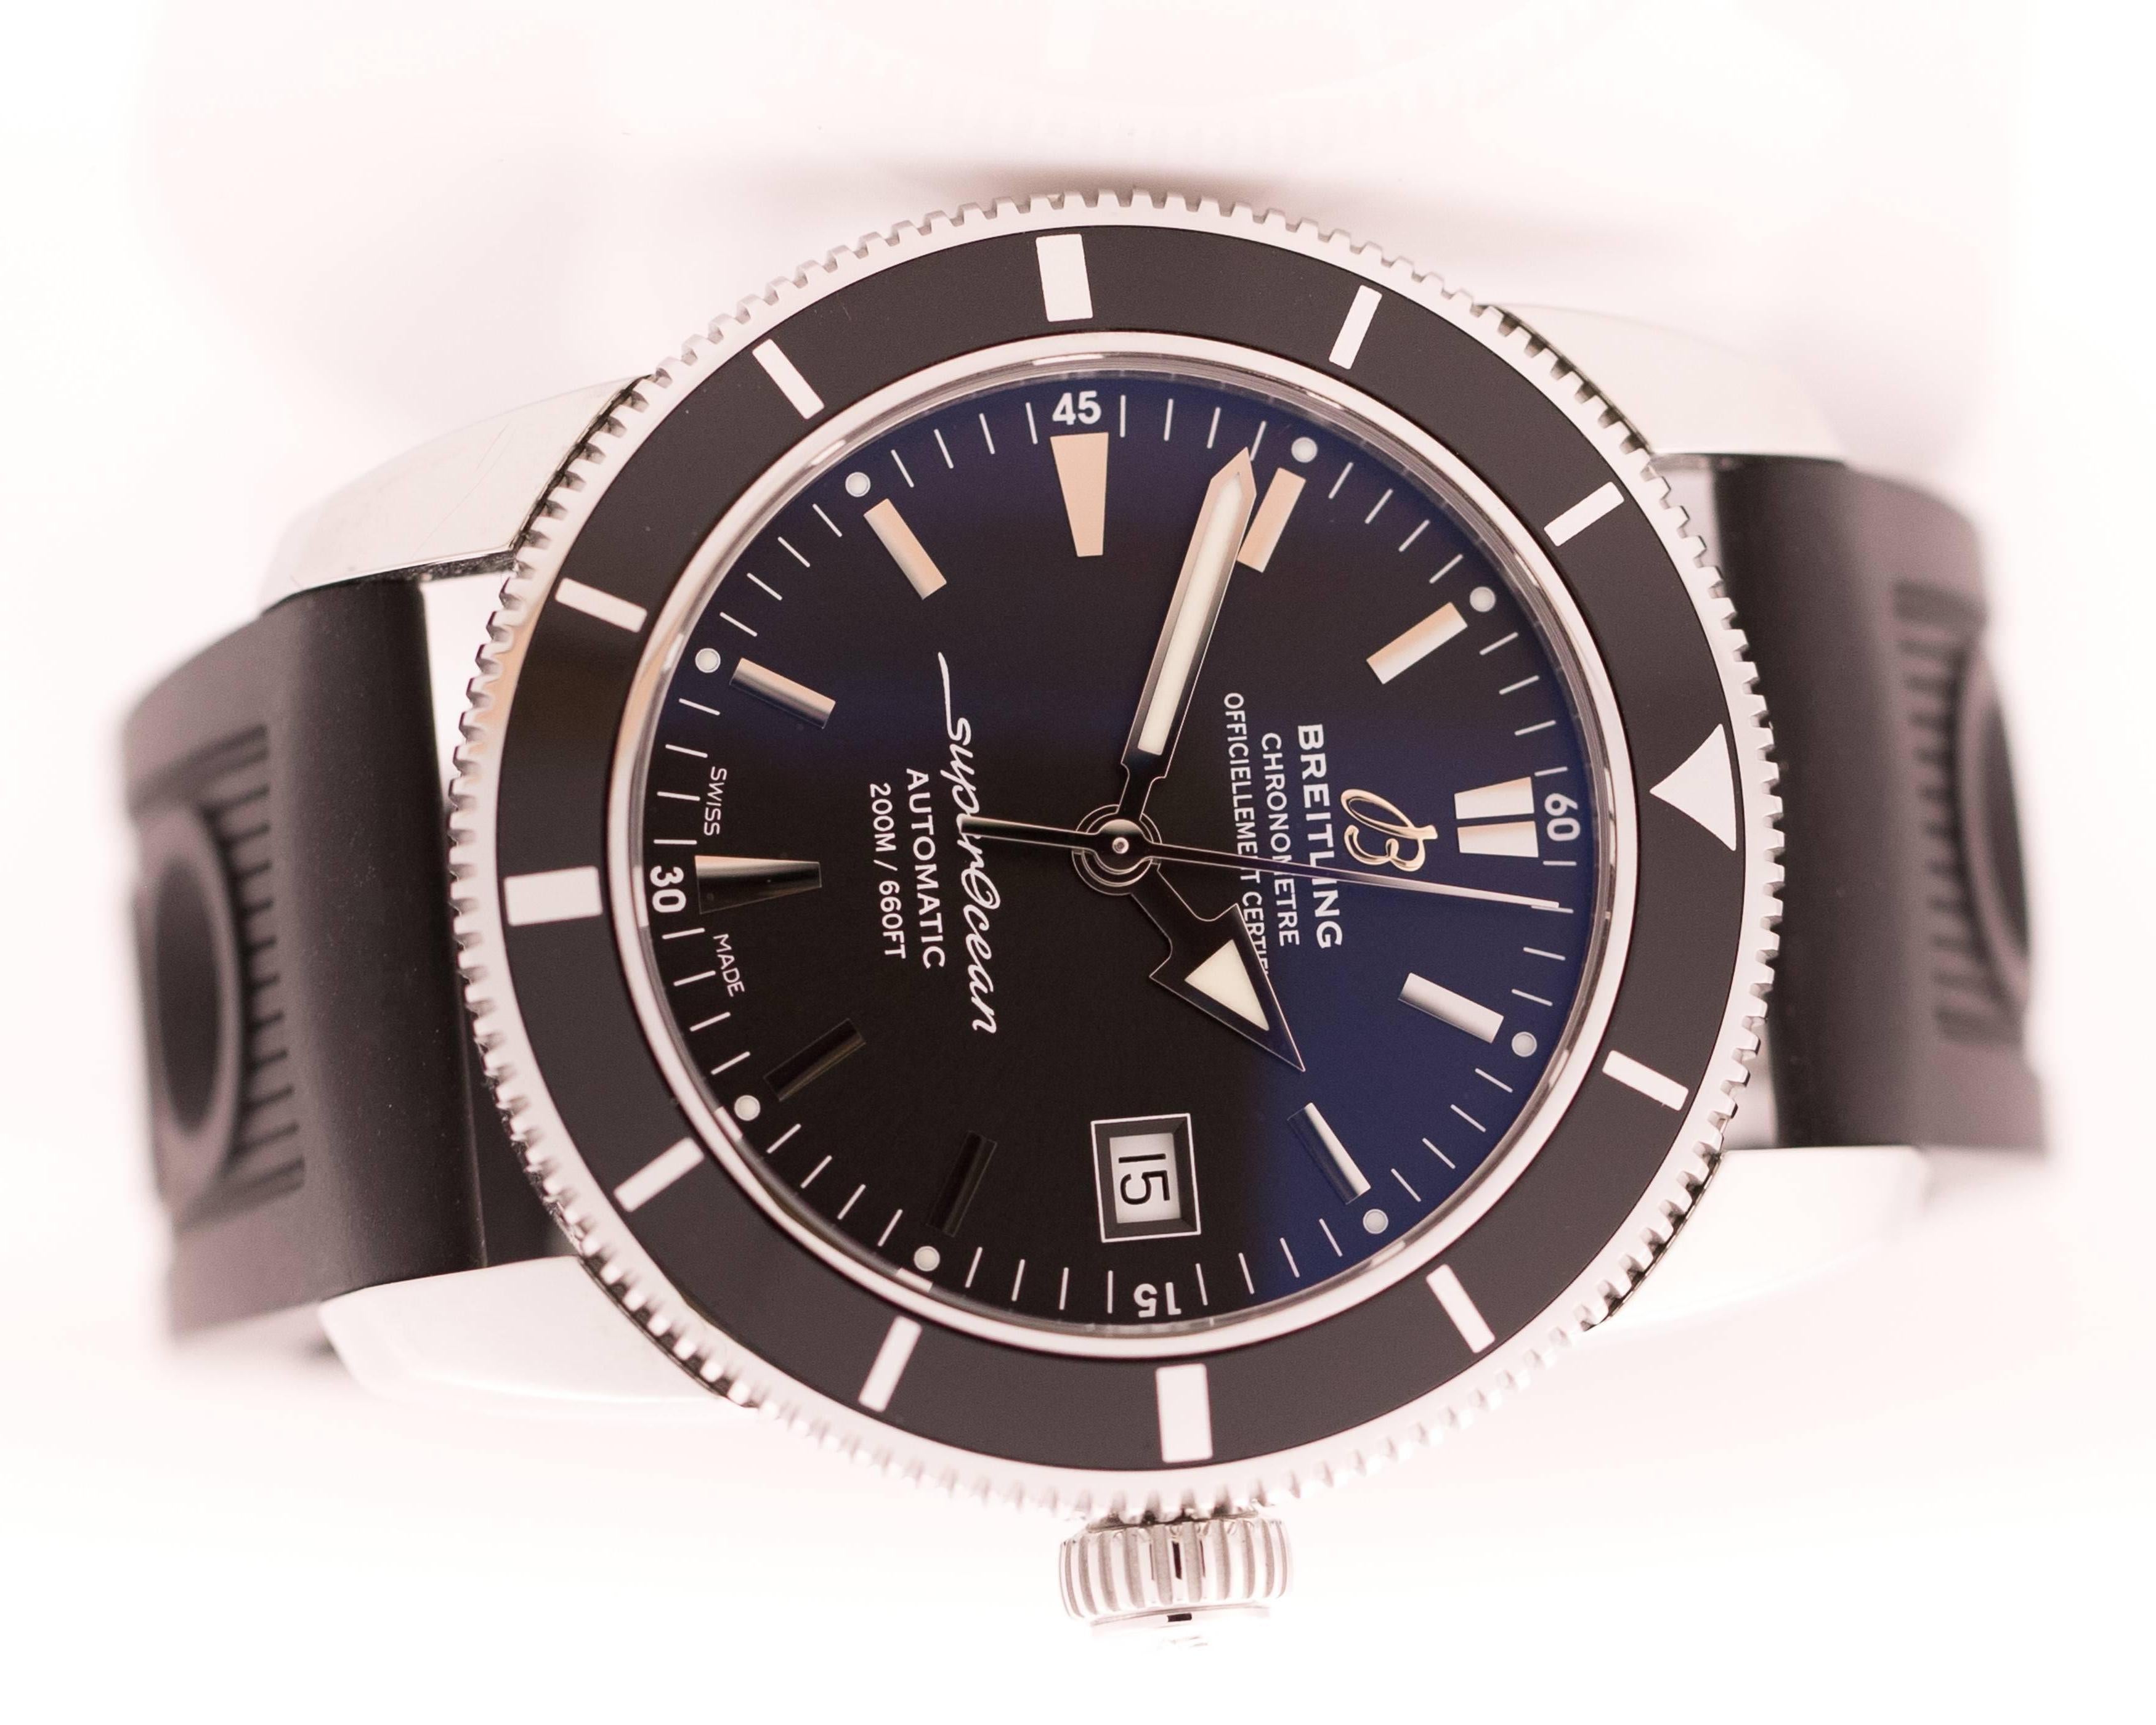 This elegant yet sporty Breitling SuperOcean Heritage 42 Diver’s watch reflects the design and function of it's predecessor, the Legendary 1950s model. This Chronograph Special Edition watch is water-resistant to 200 meters (660 feet).